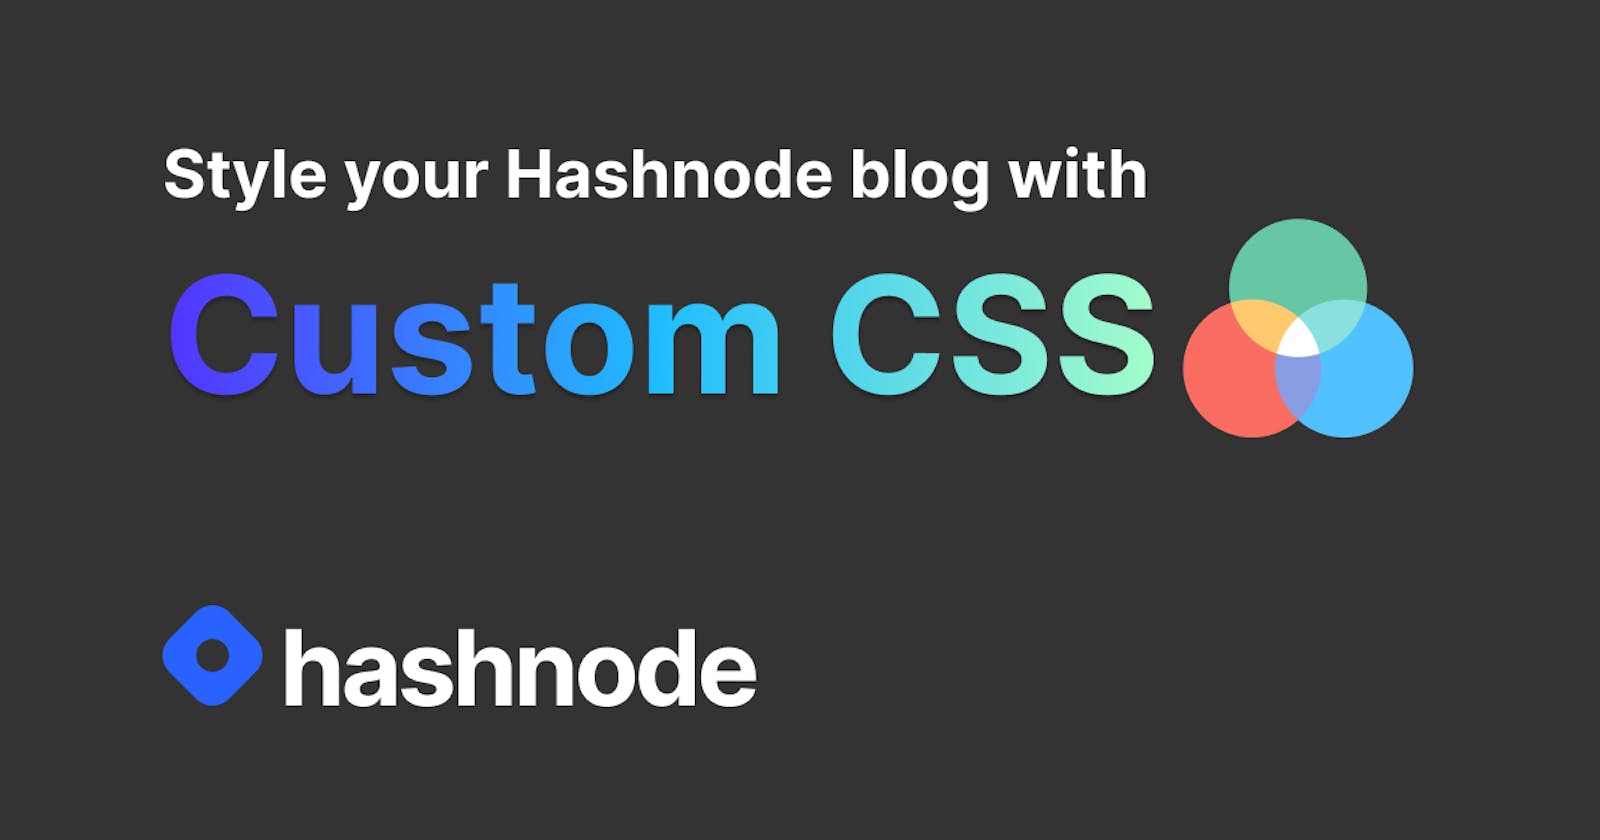 Style your Hashnode blog with Custom CSS